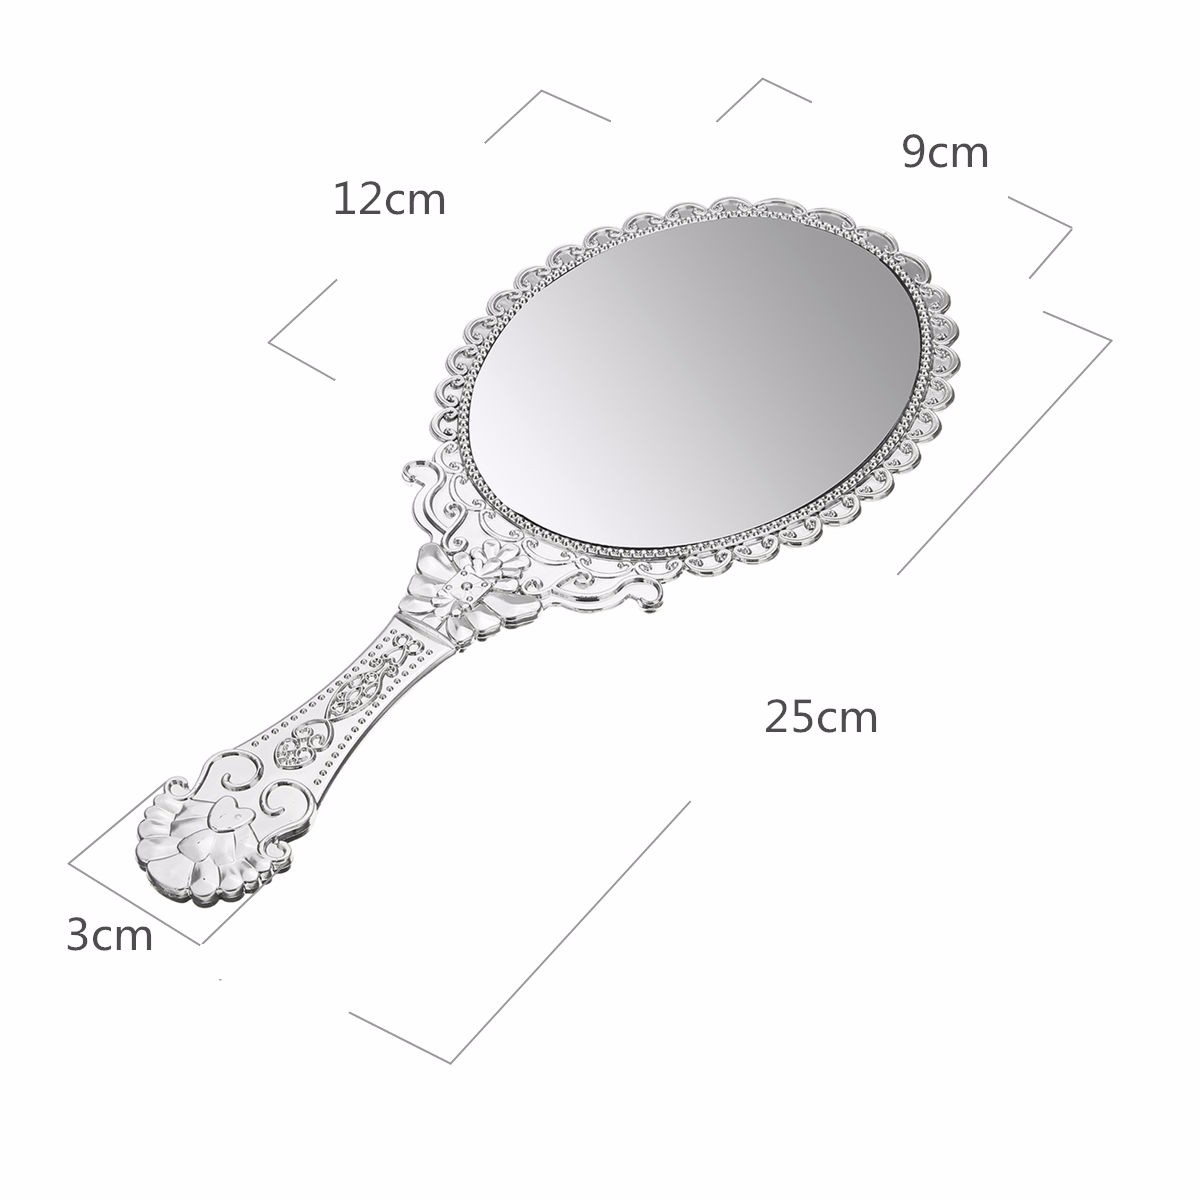 Vintage-Repousse-Oval-Makeup-Floral-Mirror-Hand-Held-Mirrors-Silver-Cosmetic-1096061